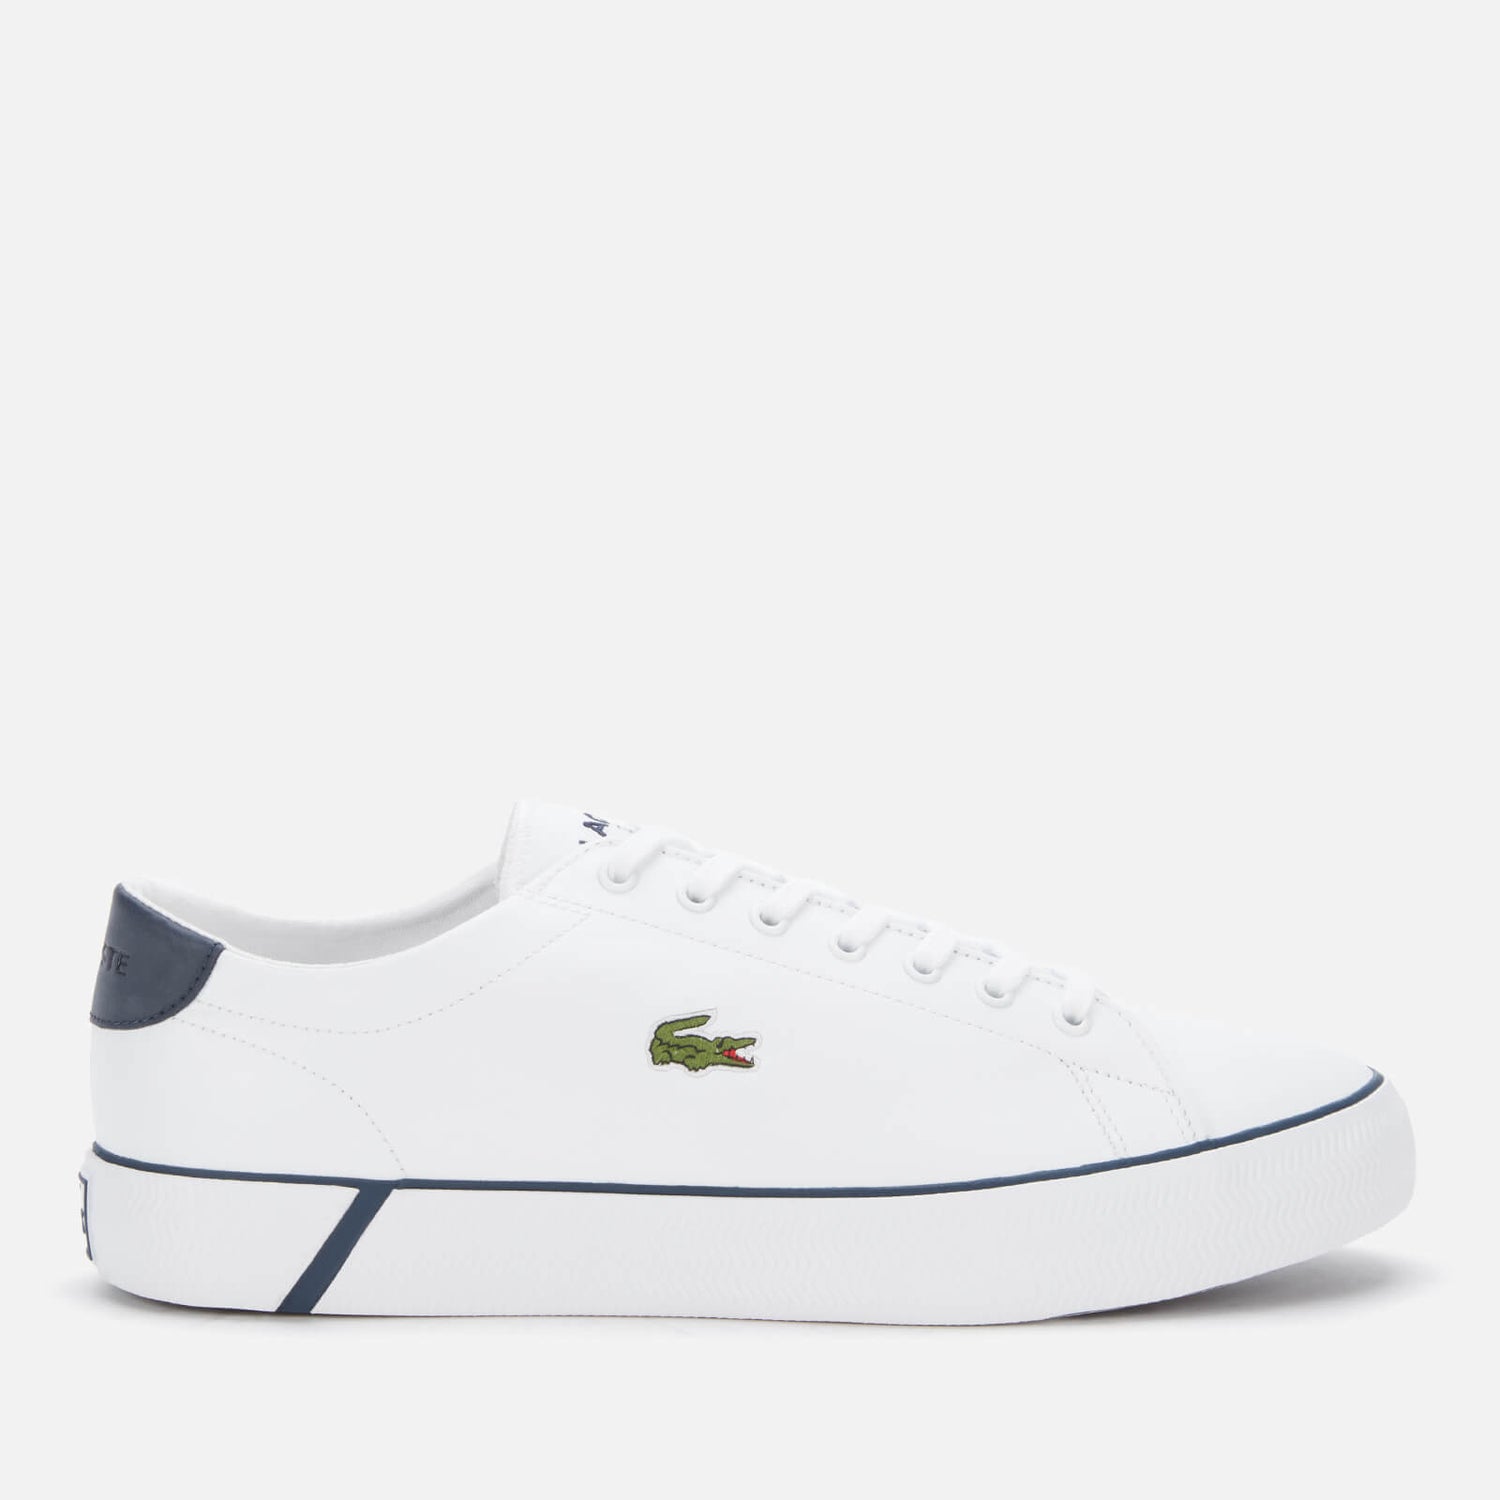 Lacoste Men's Gripshot Bl21 1 Leather Vulcanised Trainers - White/Navy